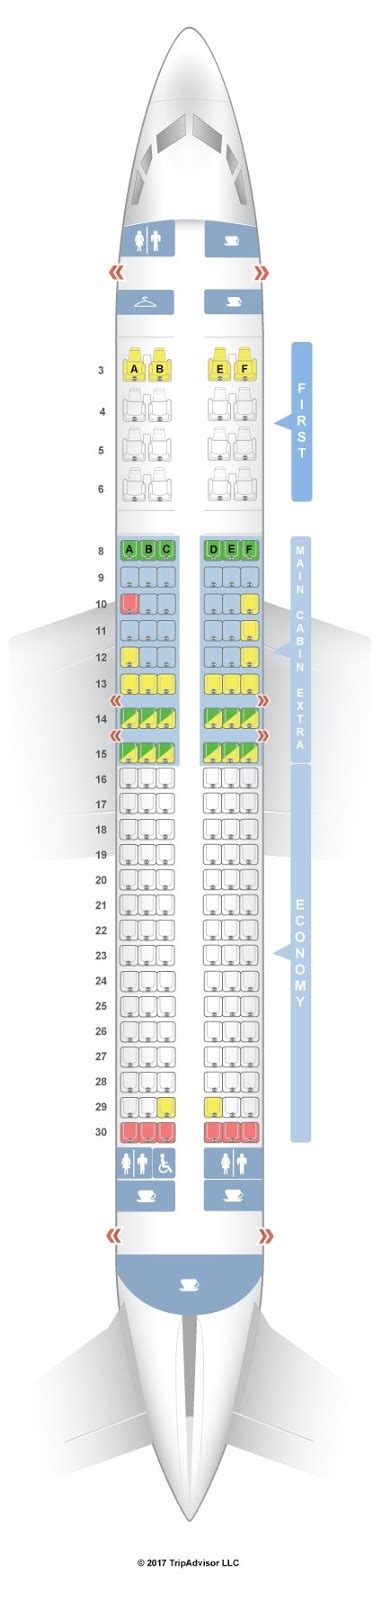 Articulating recliner seats with tray tables in the. . 737800 seat map american